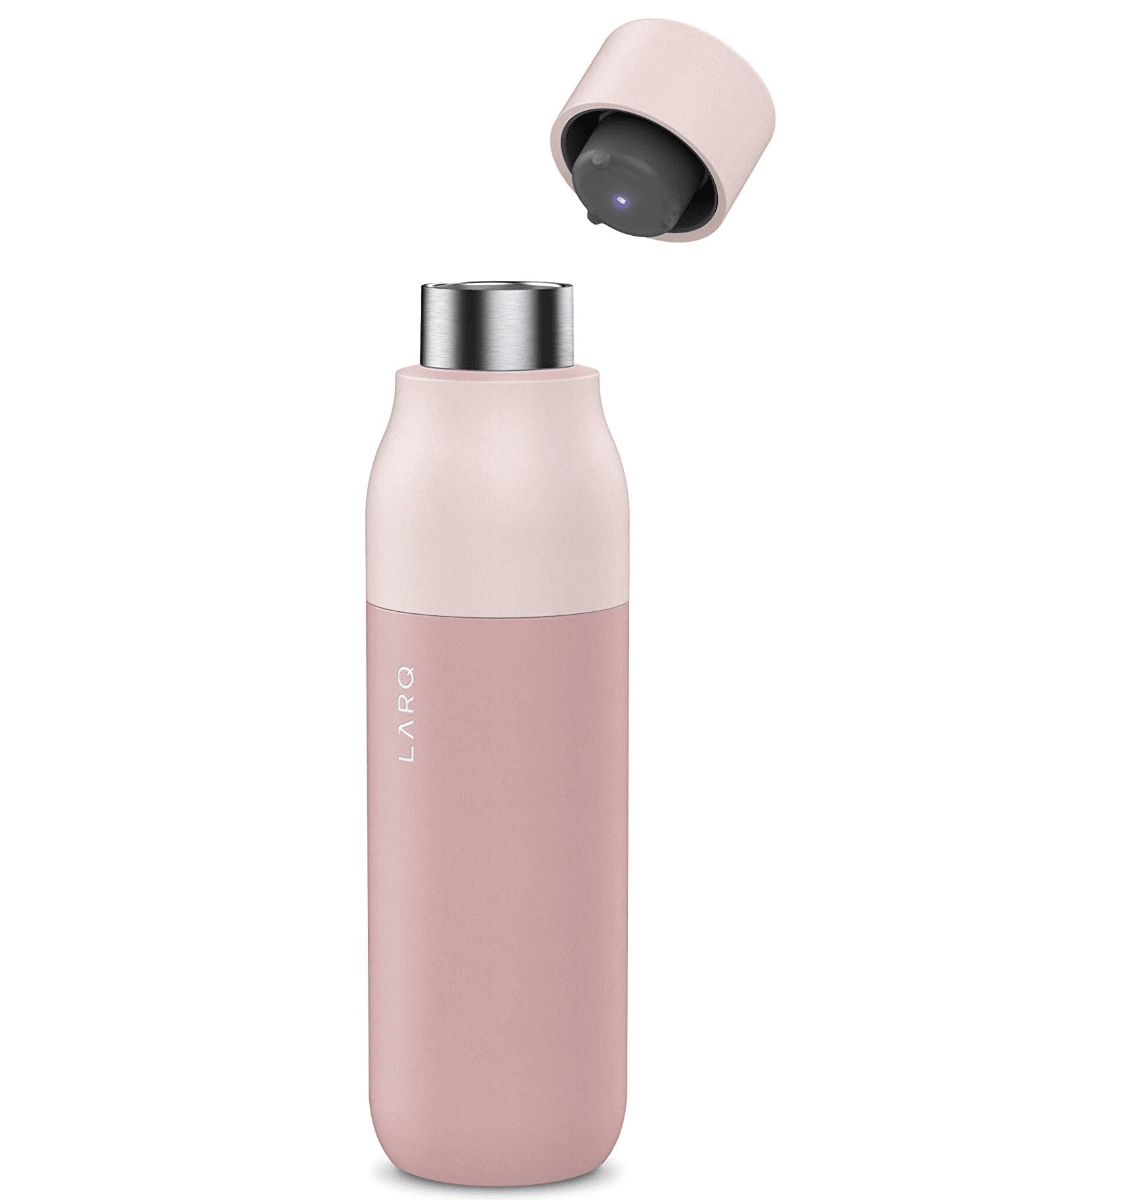 Larq Self-Cleaning Water Bottle Review — May 2023